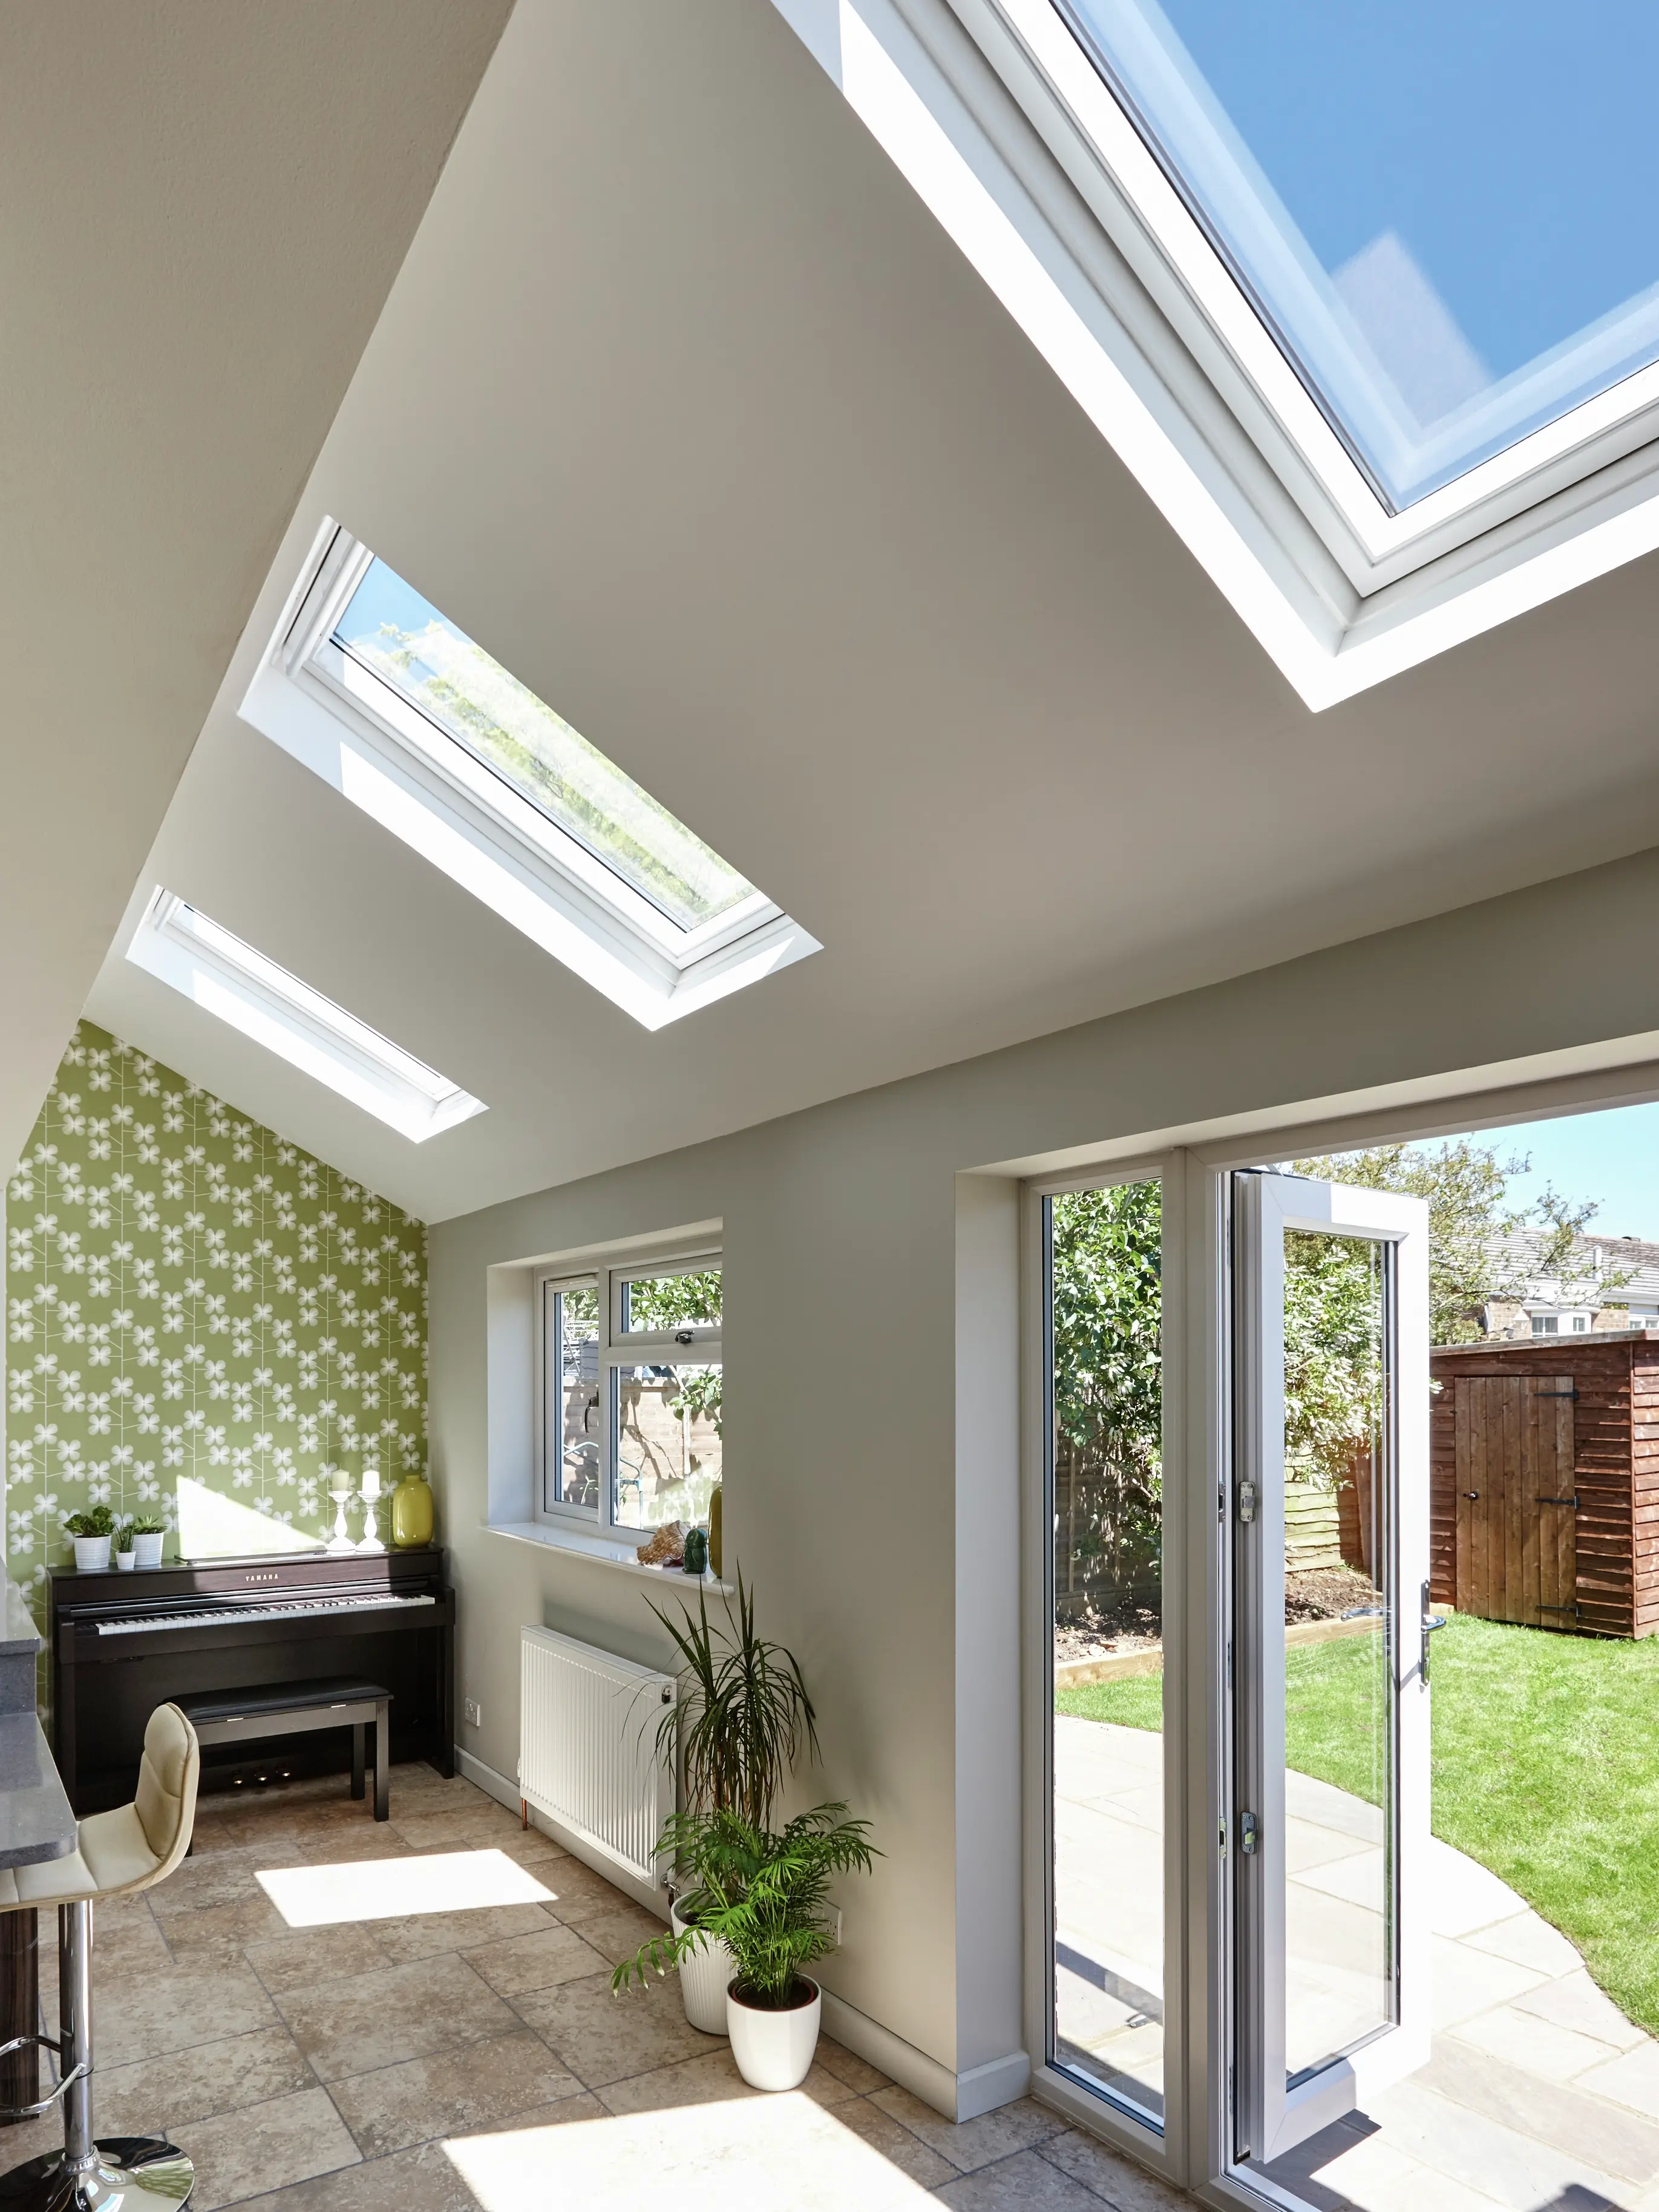 Home office with VELUX roof windows, piano, and open doors to garden.